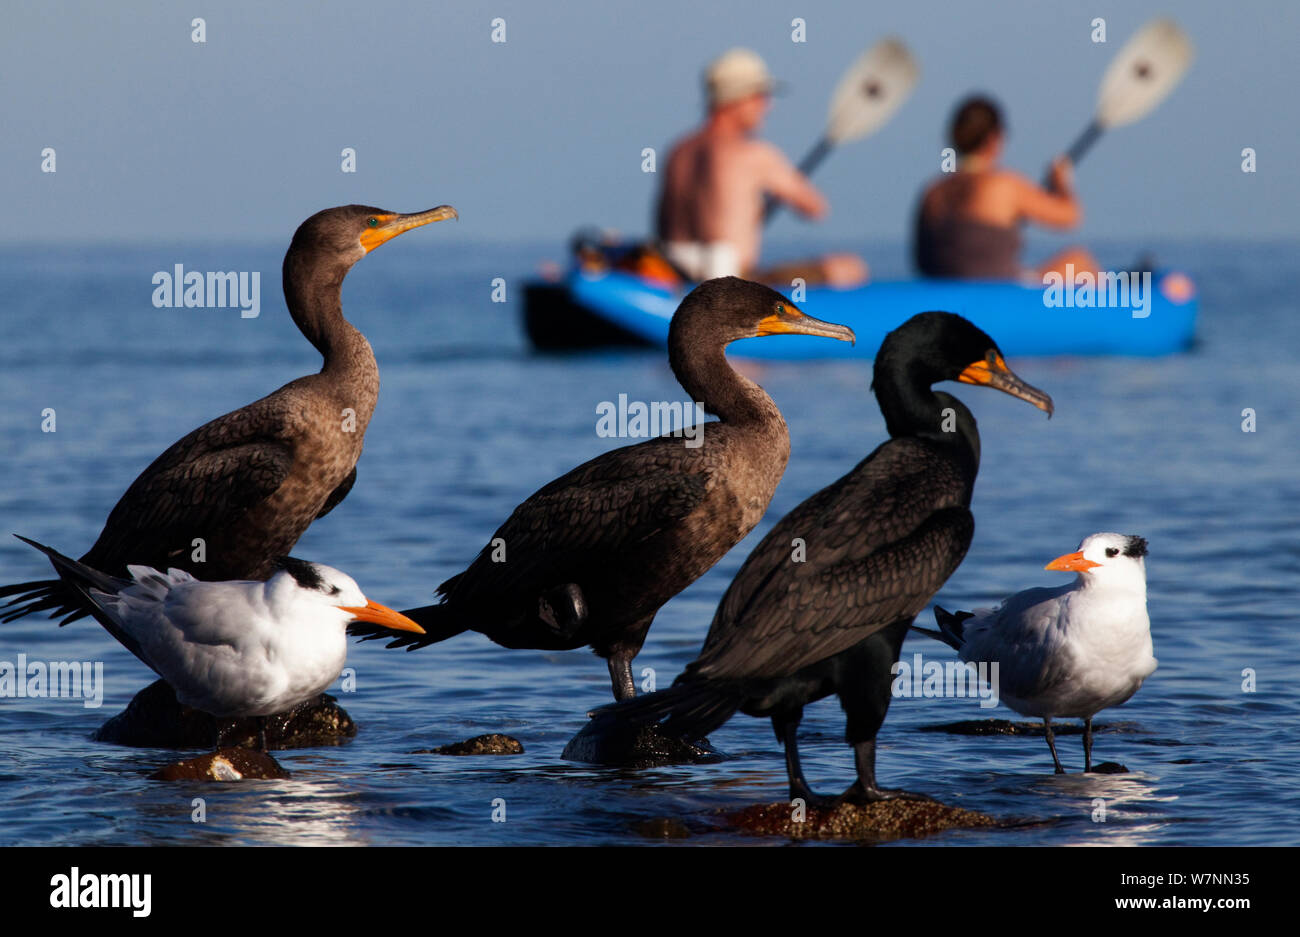 Double-Crested Cormorant (Phalacrocorax auritus), Royal Tern (Sterna maxima) and tourists canoeing in background, El Requeson, Gulf of California, Baja California Peninsula, Mexico, December. (Digitally altered: horizon lines corrected) Stock Photo